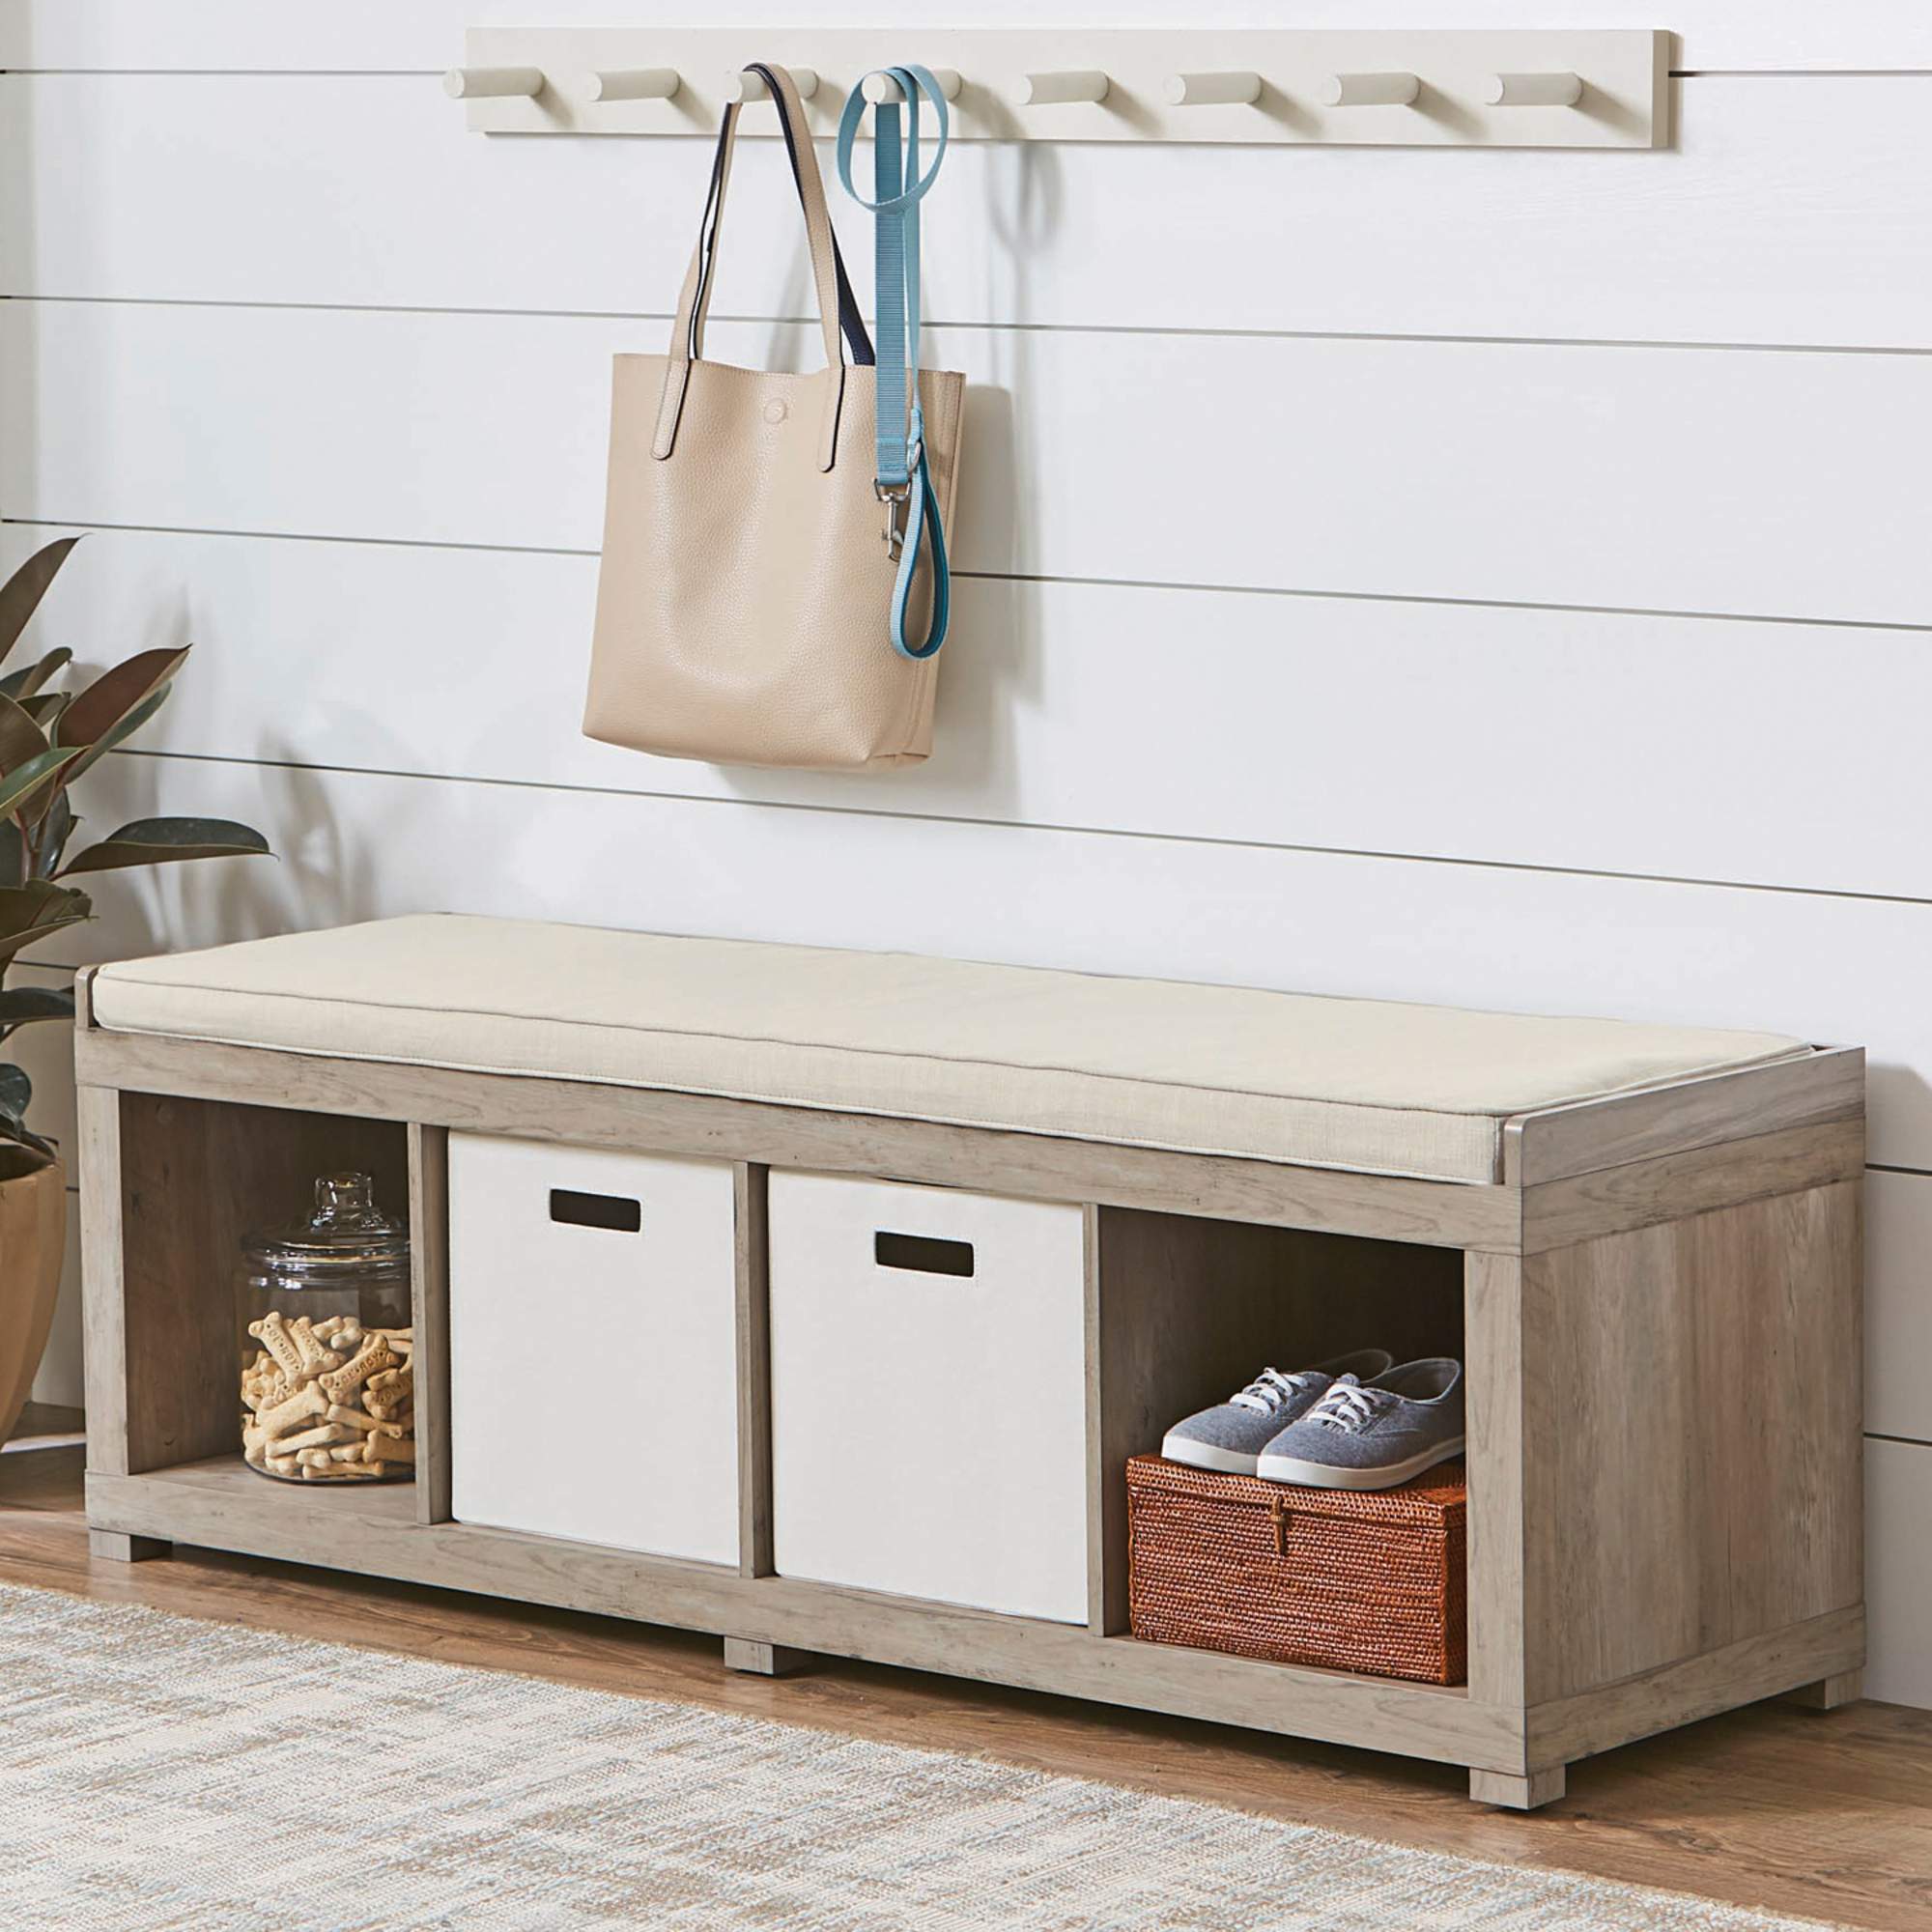 Better Homes and Gardens 4-Cube Organizer Bench